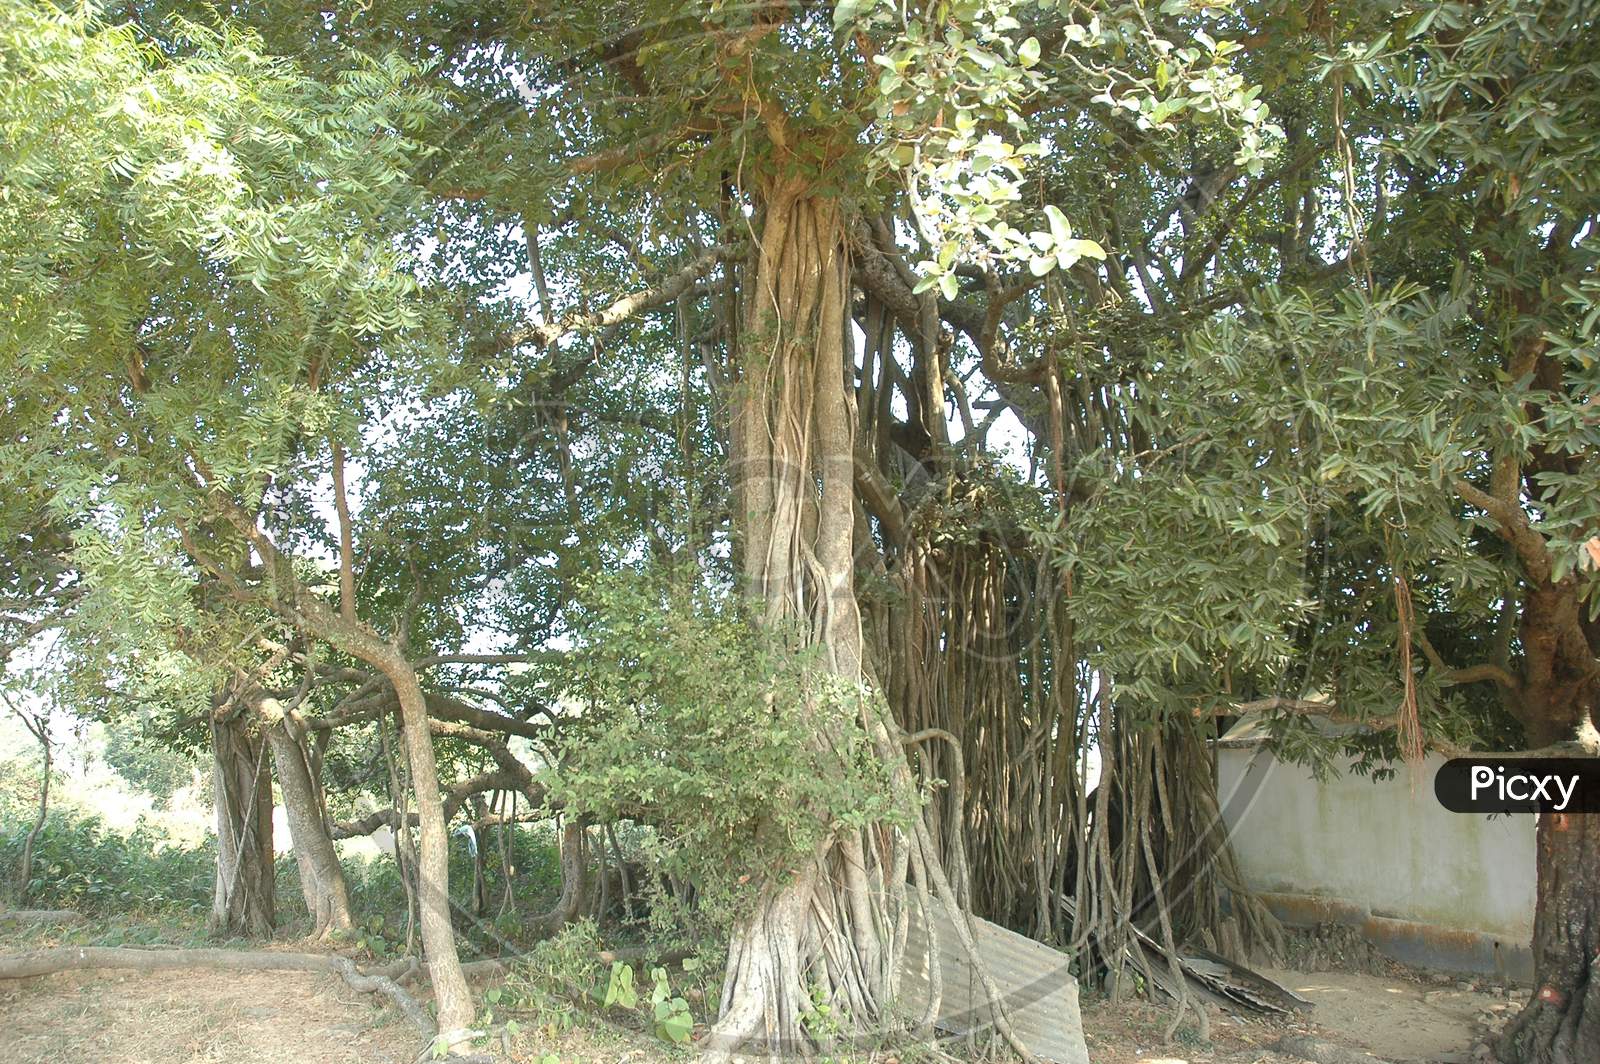 A Big Banyan  Tree With Roots In Murshidabad, West Bengal